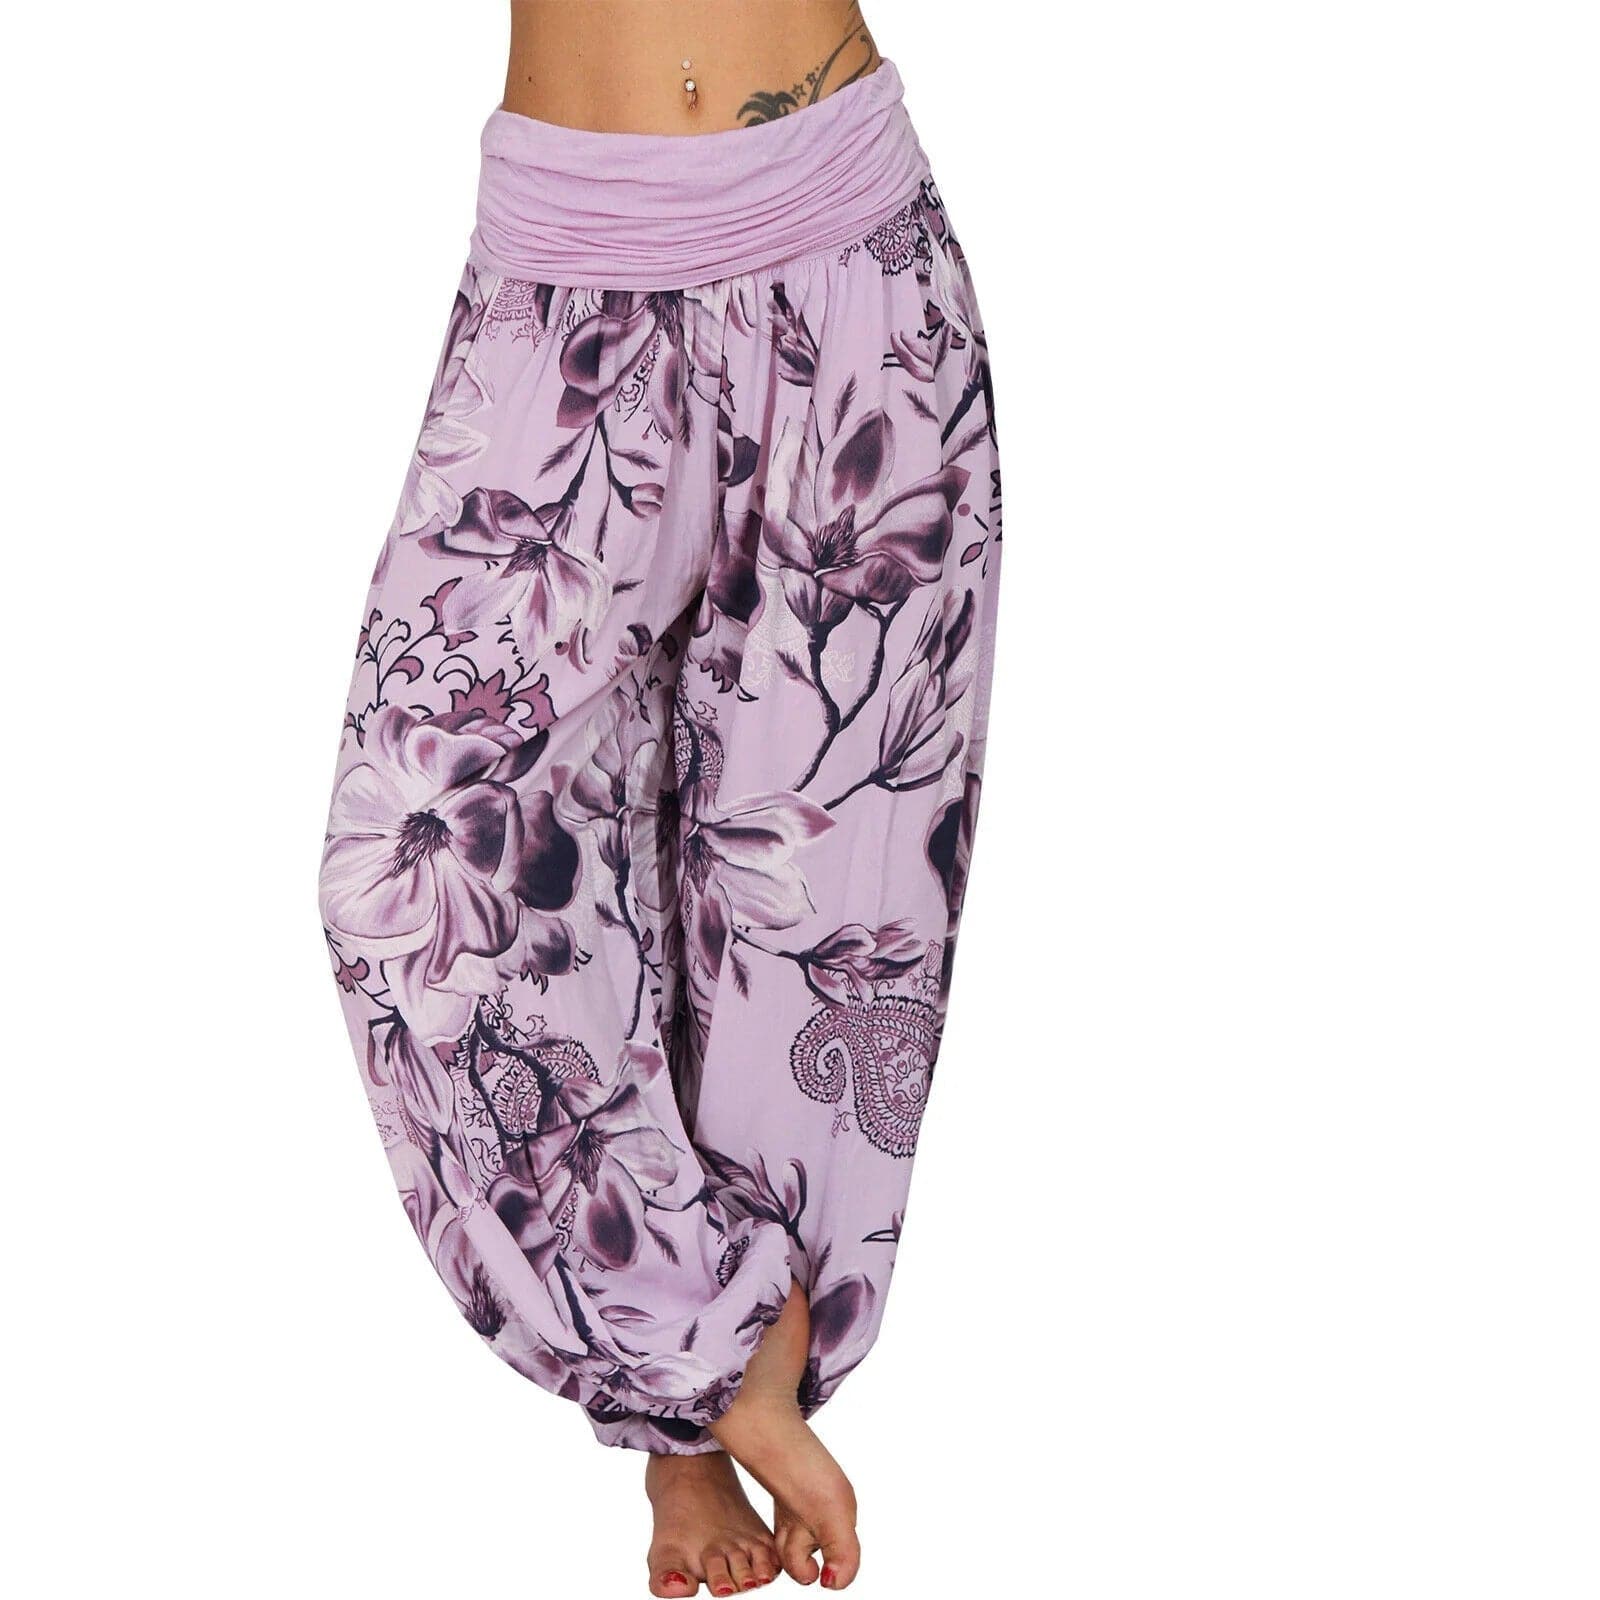 Casual Wide Leg Harem Pants - Cotton Polyester Blend, Elastic Waist, Loose Fit, Full Length - Wandering Woman